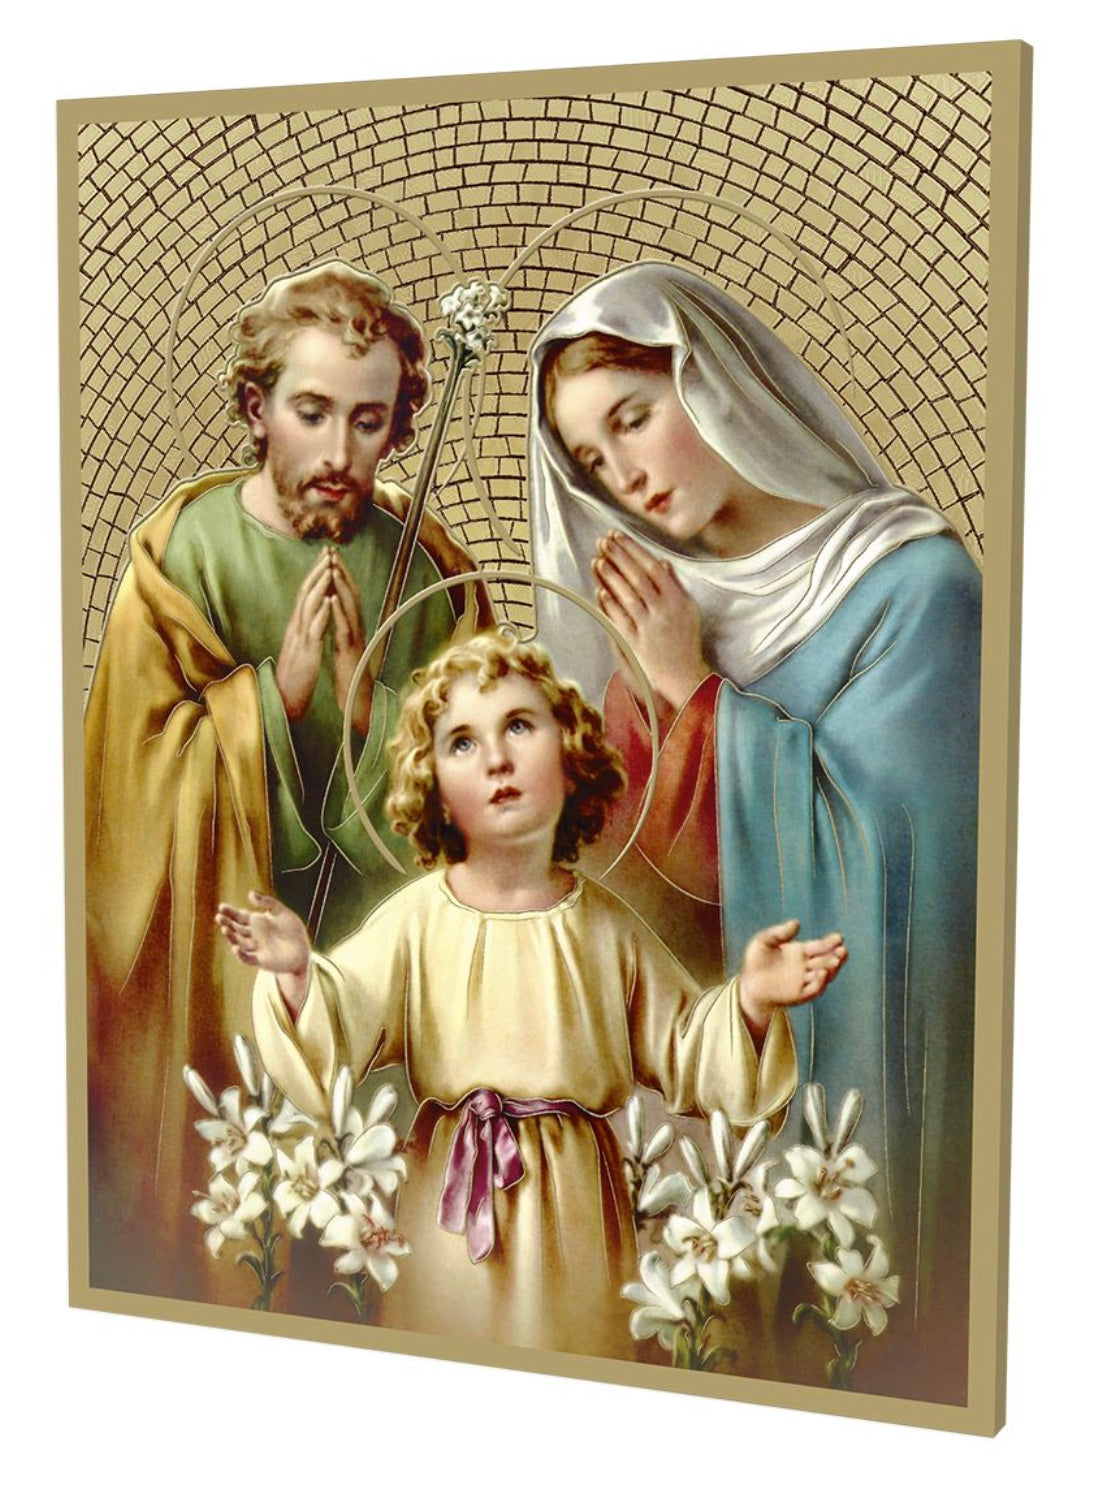 8" x 10" Gold Foil Mosaic Plaque of The Holy Family